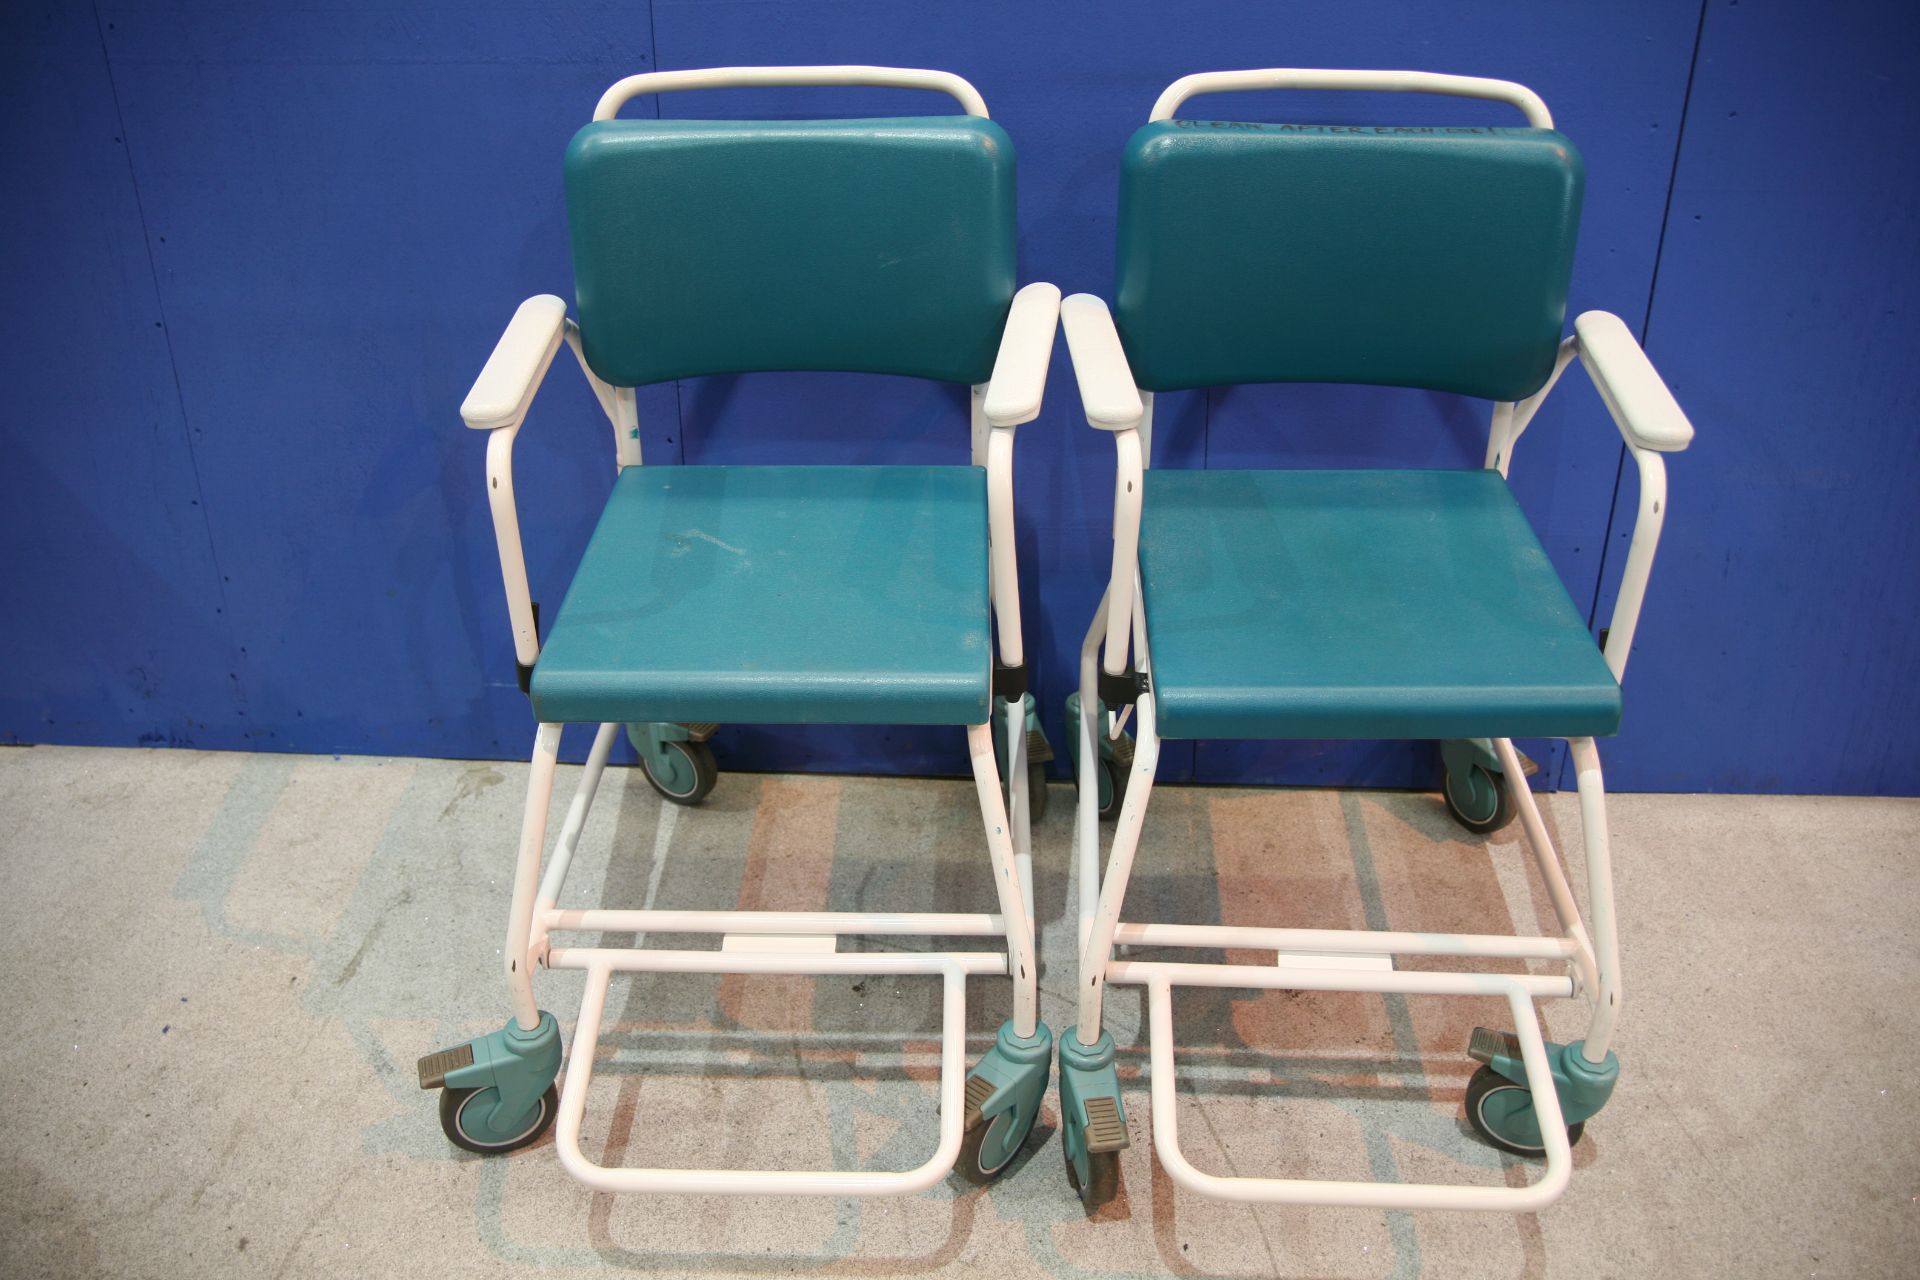 2x Vernacare Commode Chairs